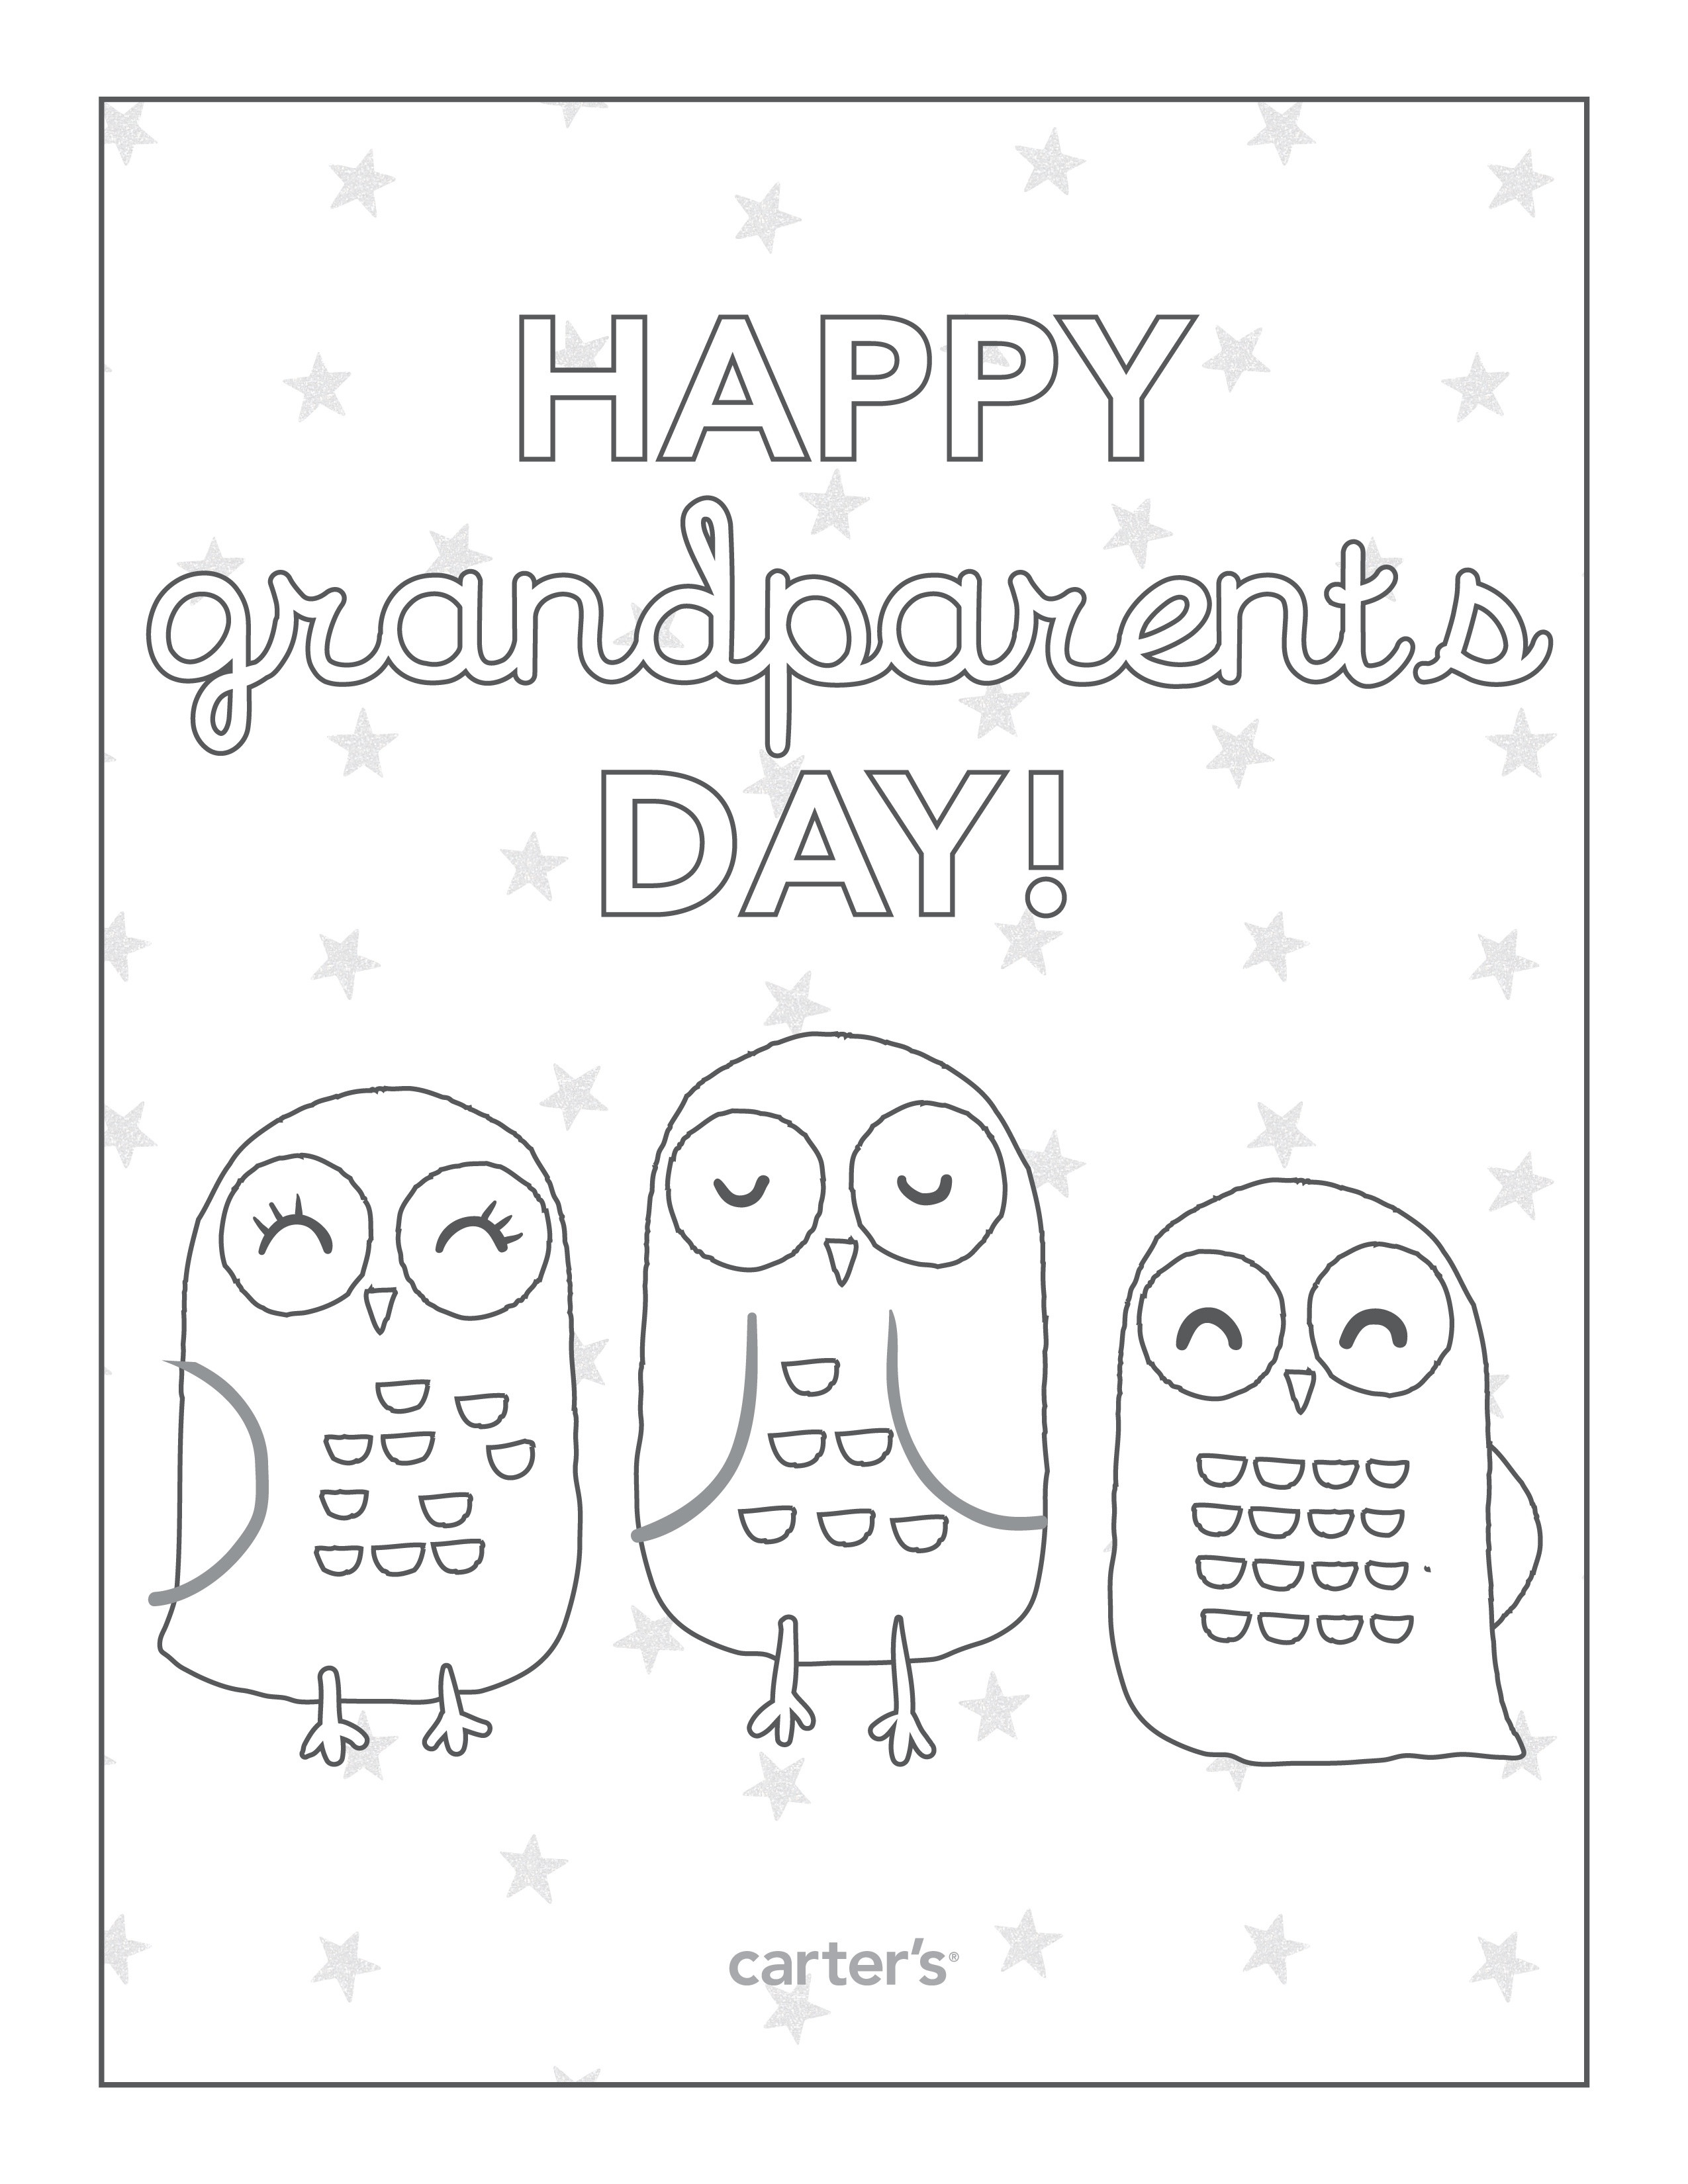 Grandparents Day Coloring Pages Best Coloring Pages For Kids